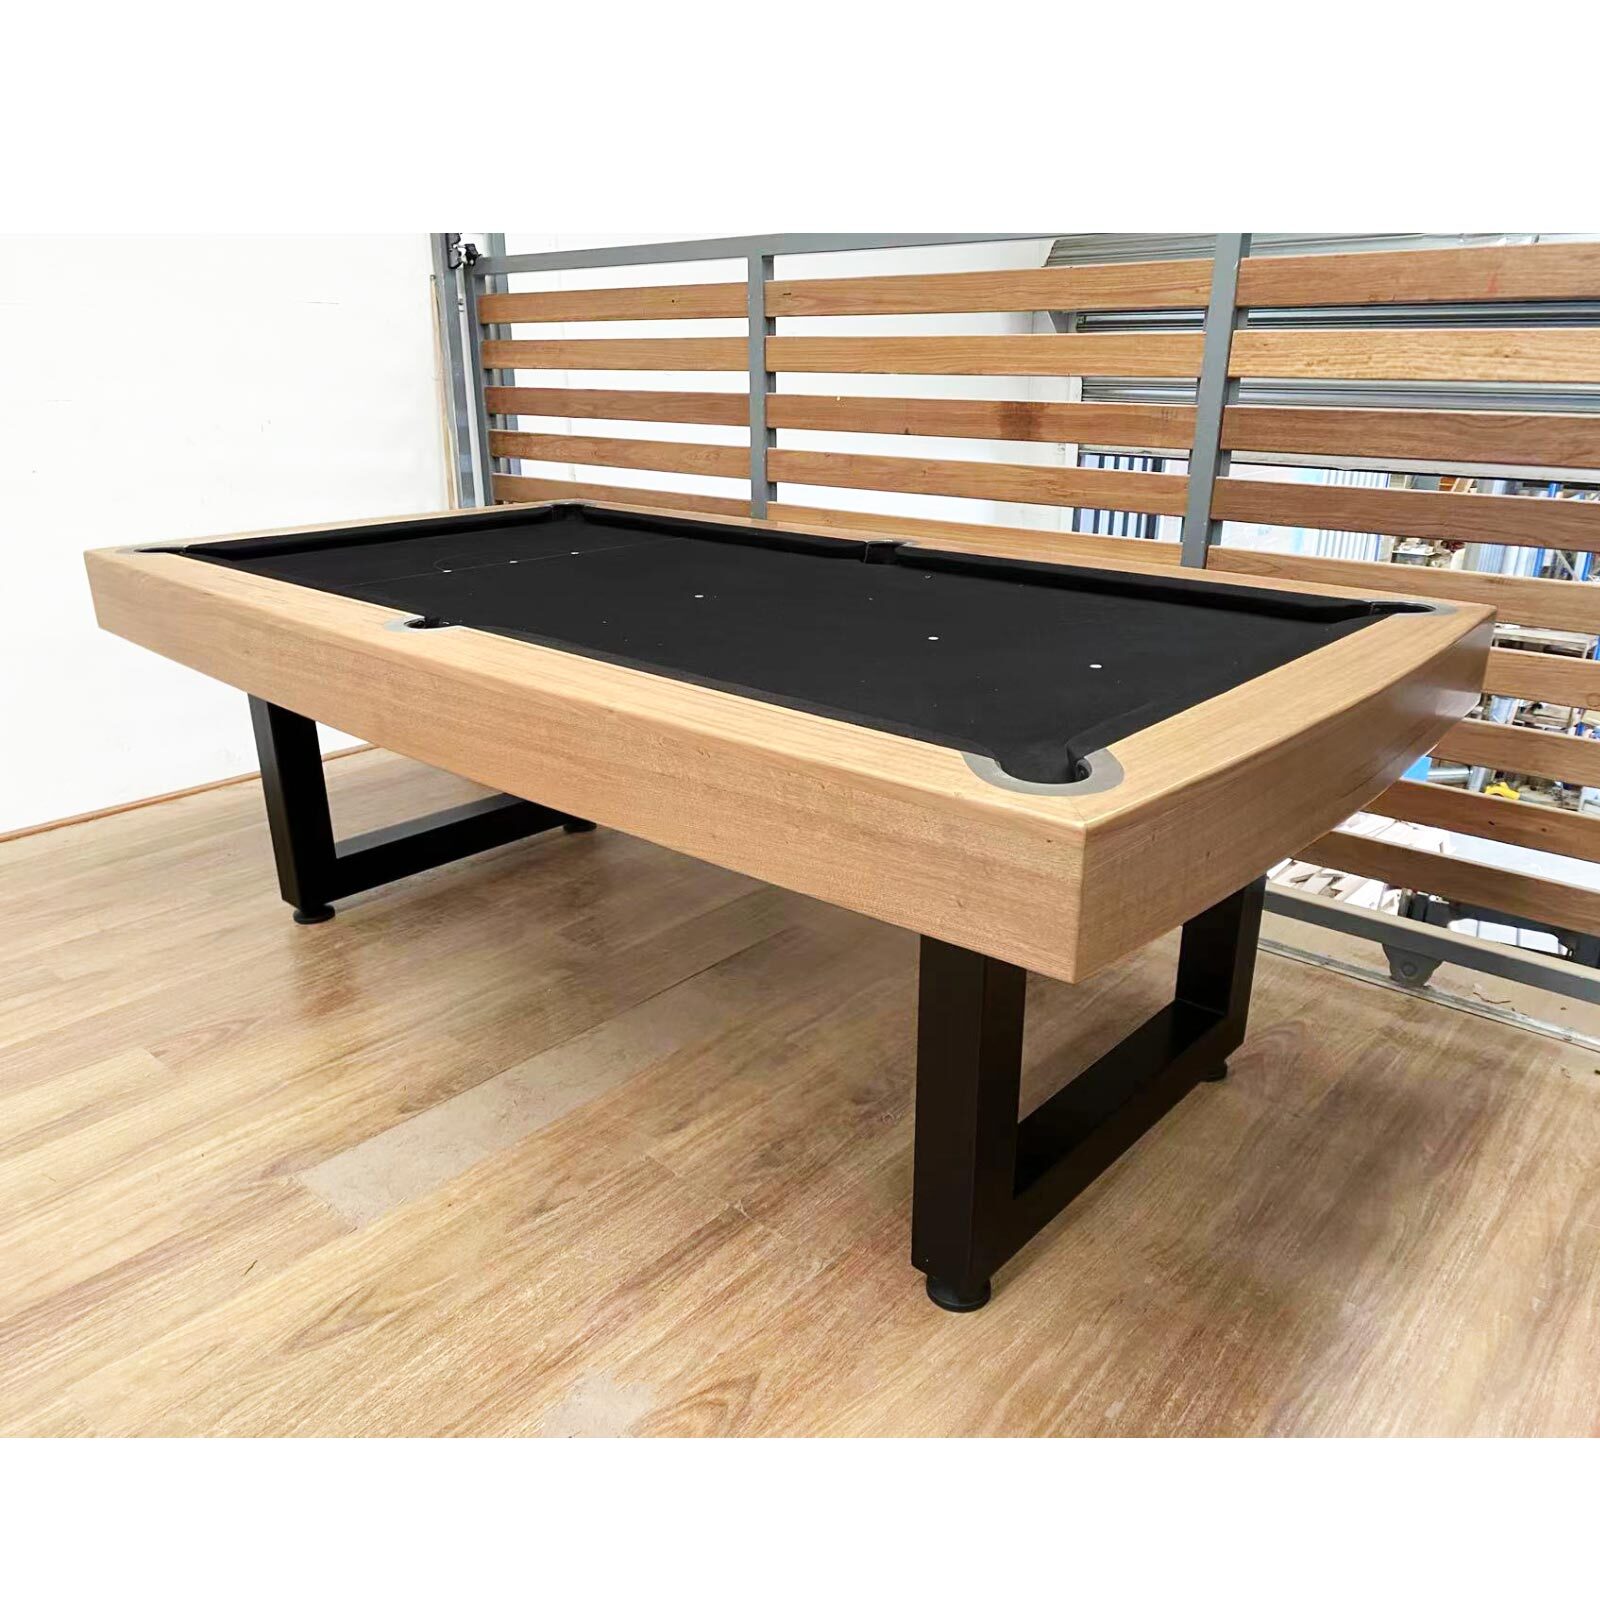 Pre-made 7 Foot Slate Odyssey Pool Billiards Table, Messmate Timber